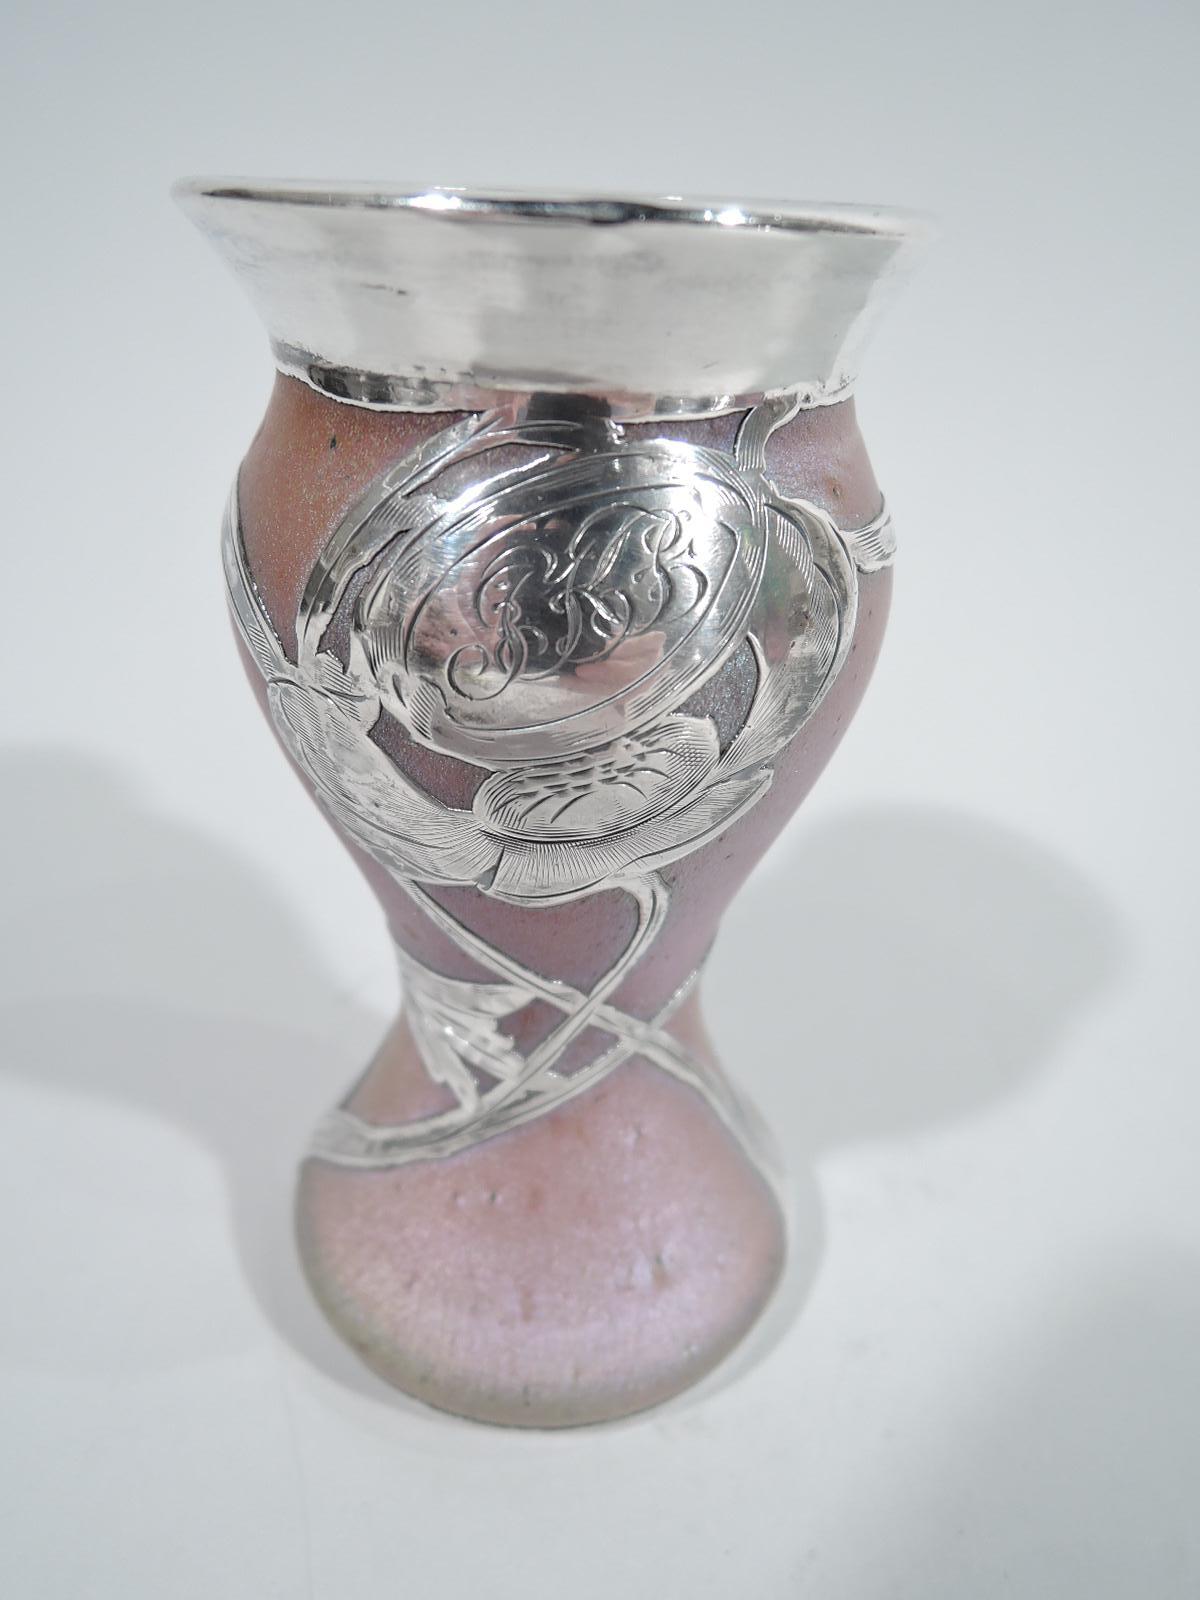 Turn-of-the-century Austrian Art Nouveau glass bud vase with engraved silver overlay. Voluptuous waisted baluster. Overlay in form of flowers with crisscrossing stems and tendrils. Oval cartouche engraved with interlaced script monogram. Flared neck